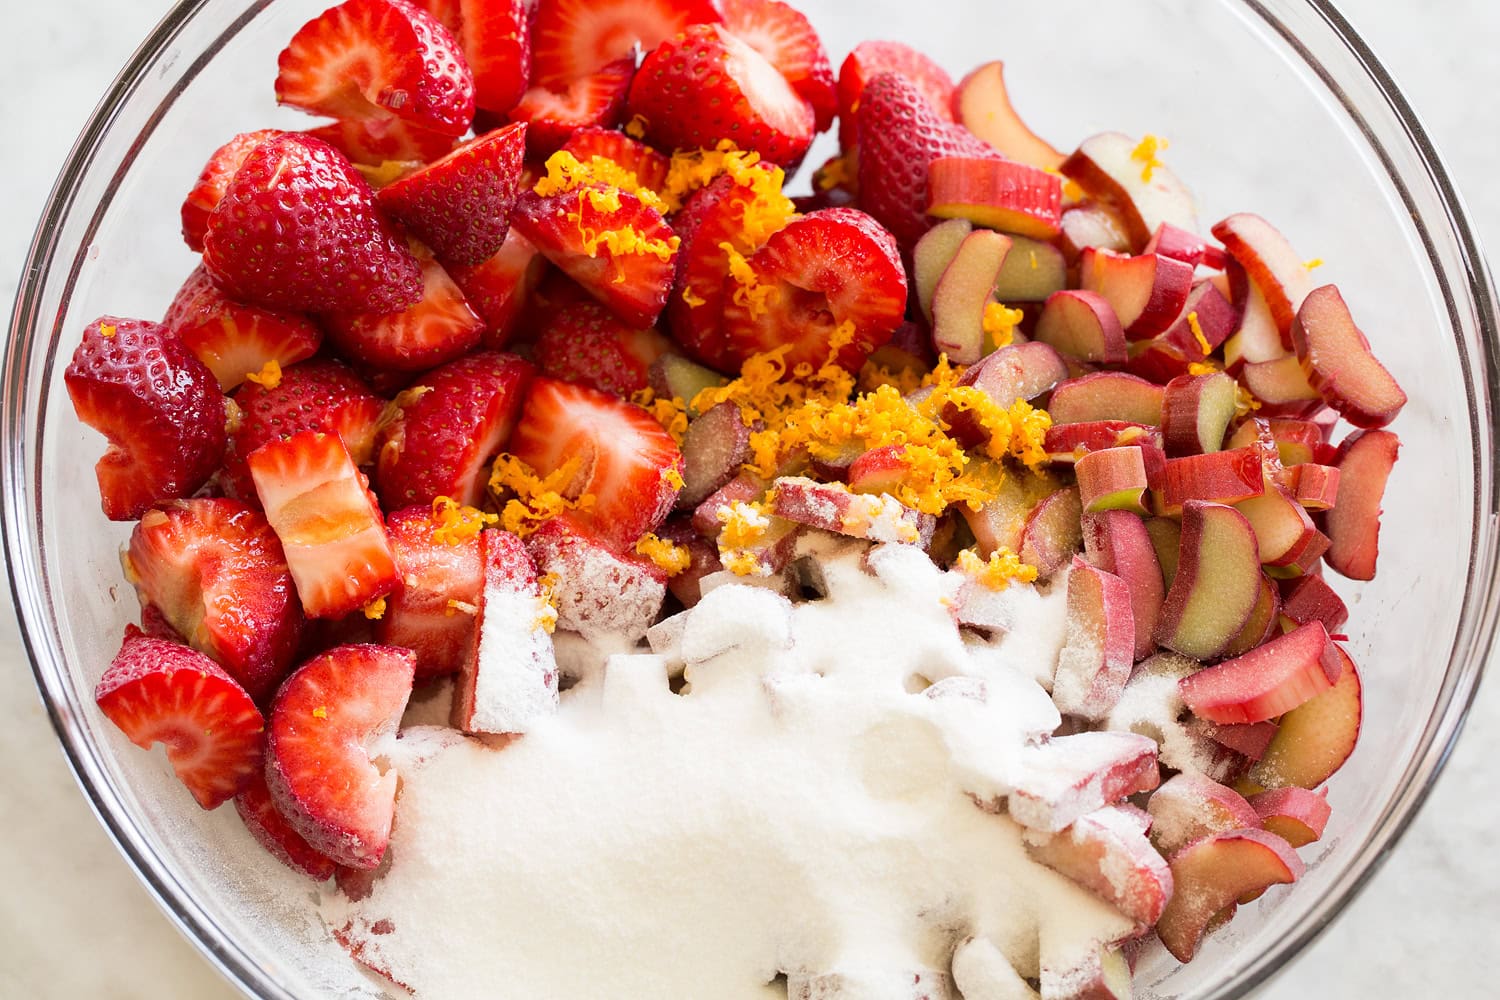 Strawberries, rhubarb and sugar in a glass mixing bowl.